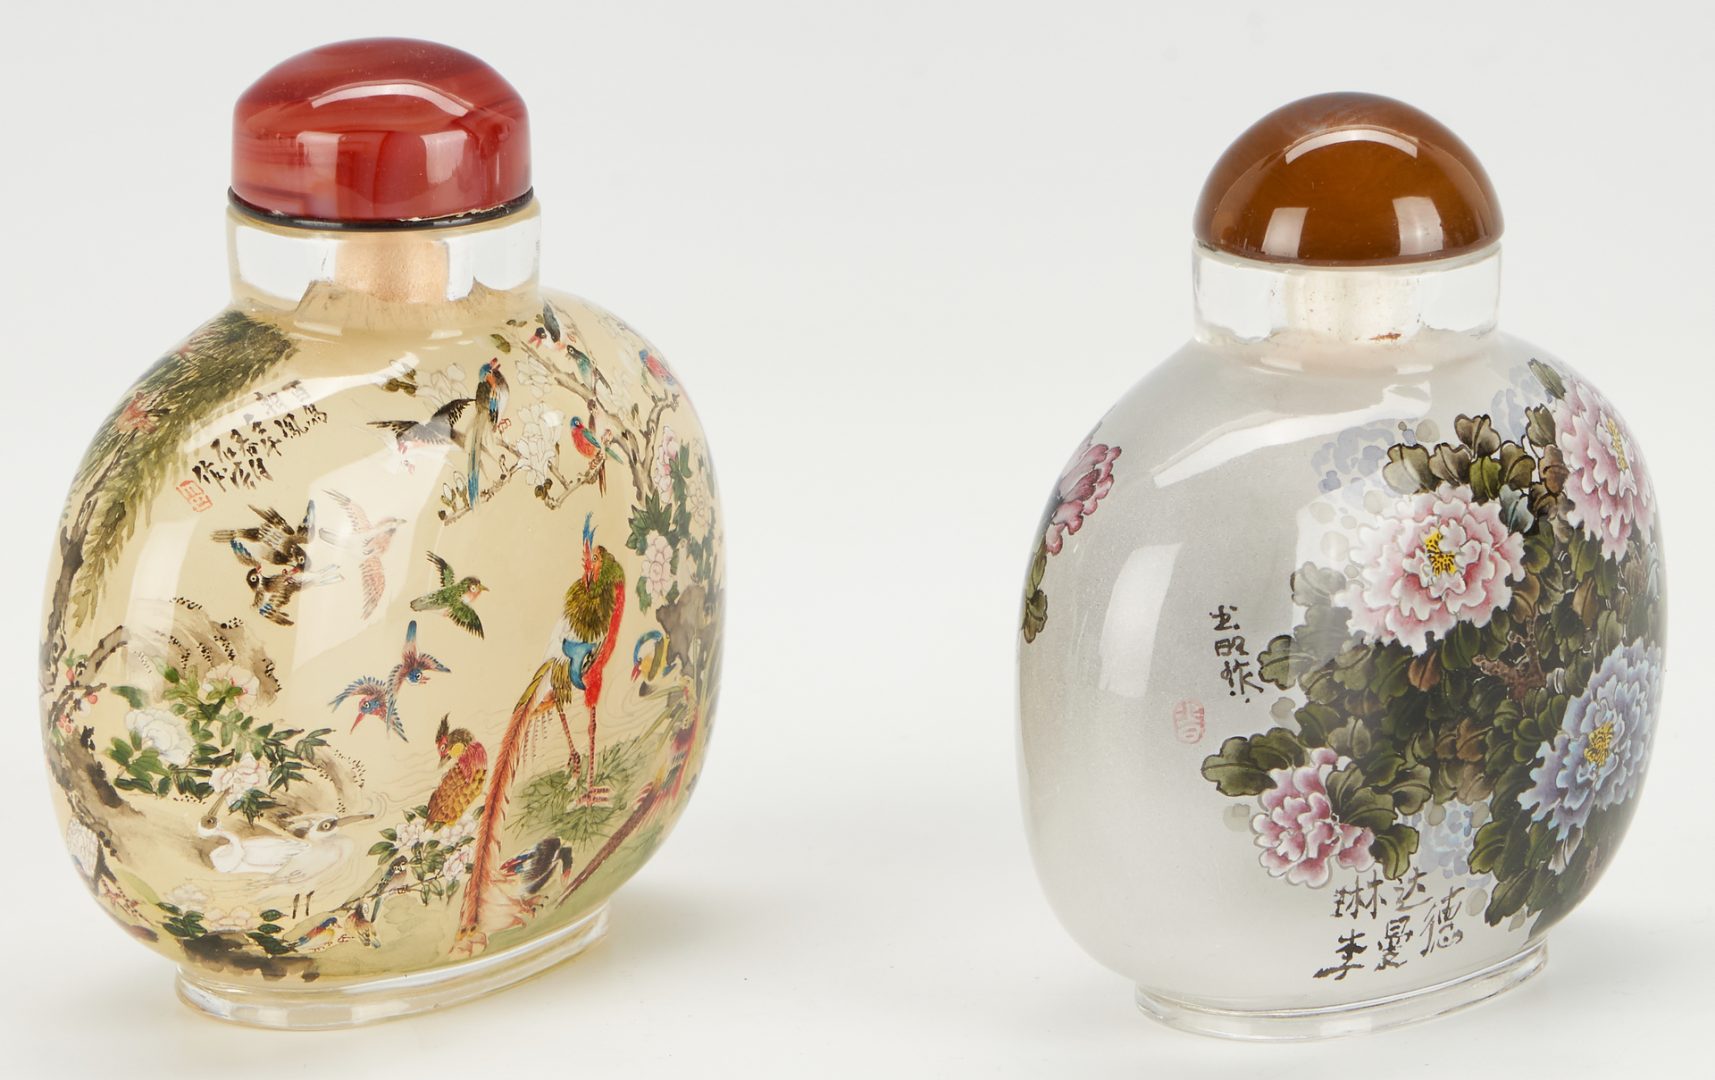 Lot 14: 5 Chinese Snuff Bottles, incl. Jade, Famille Verte, Reverse Painted